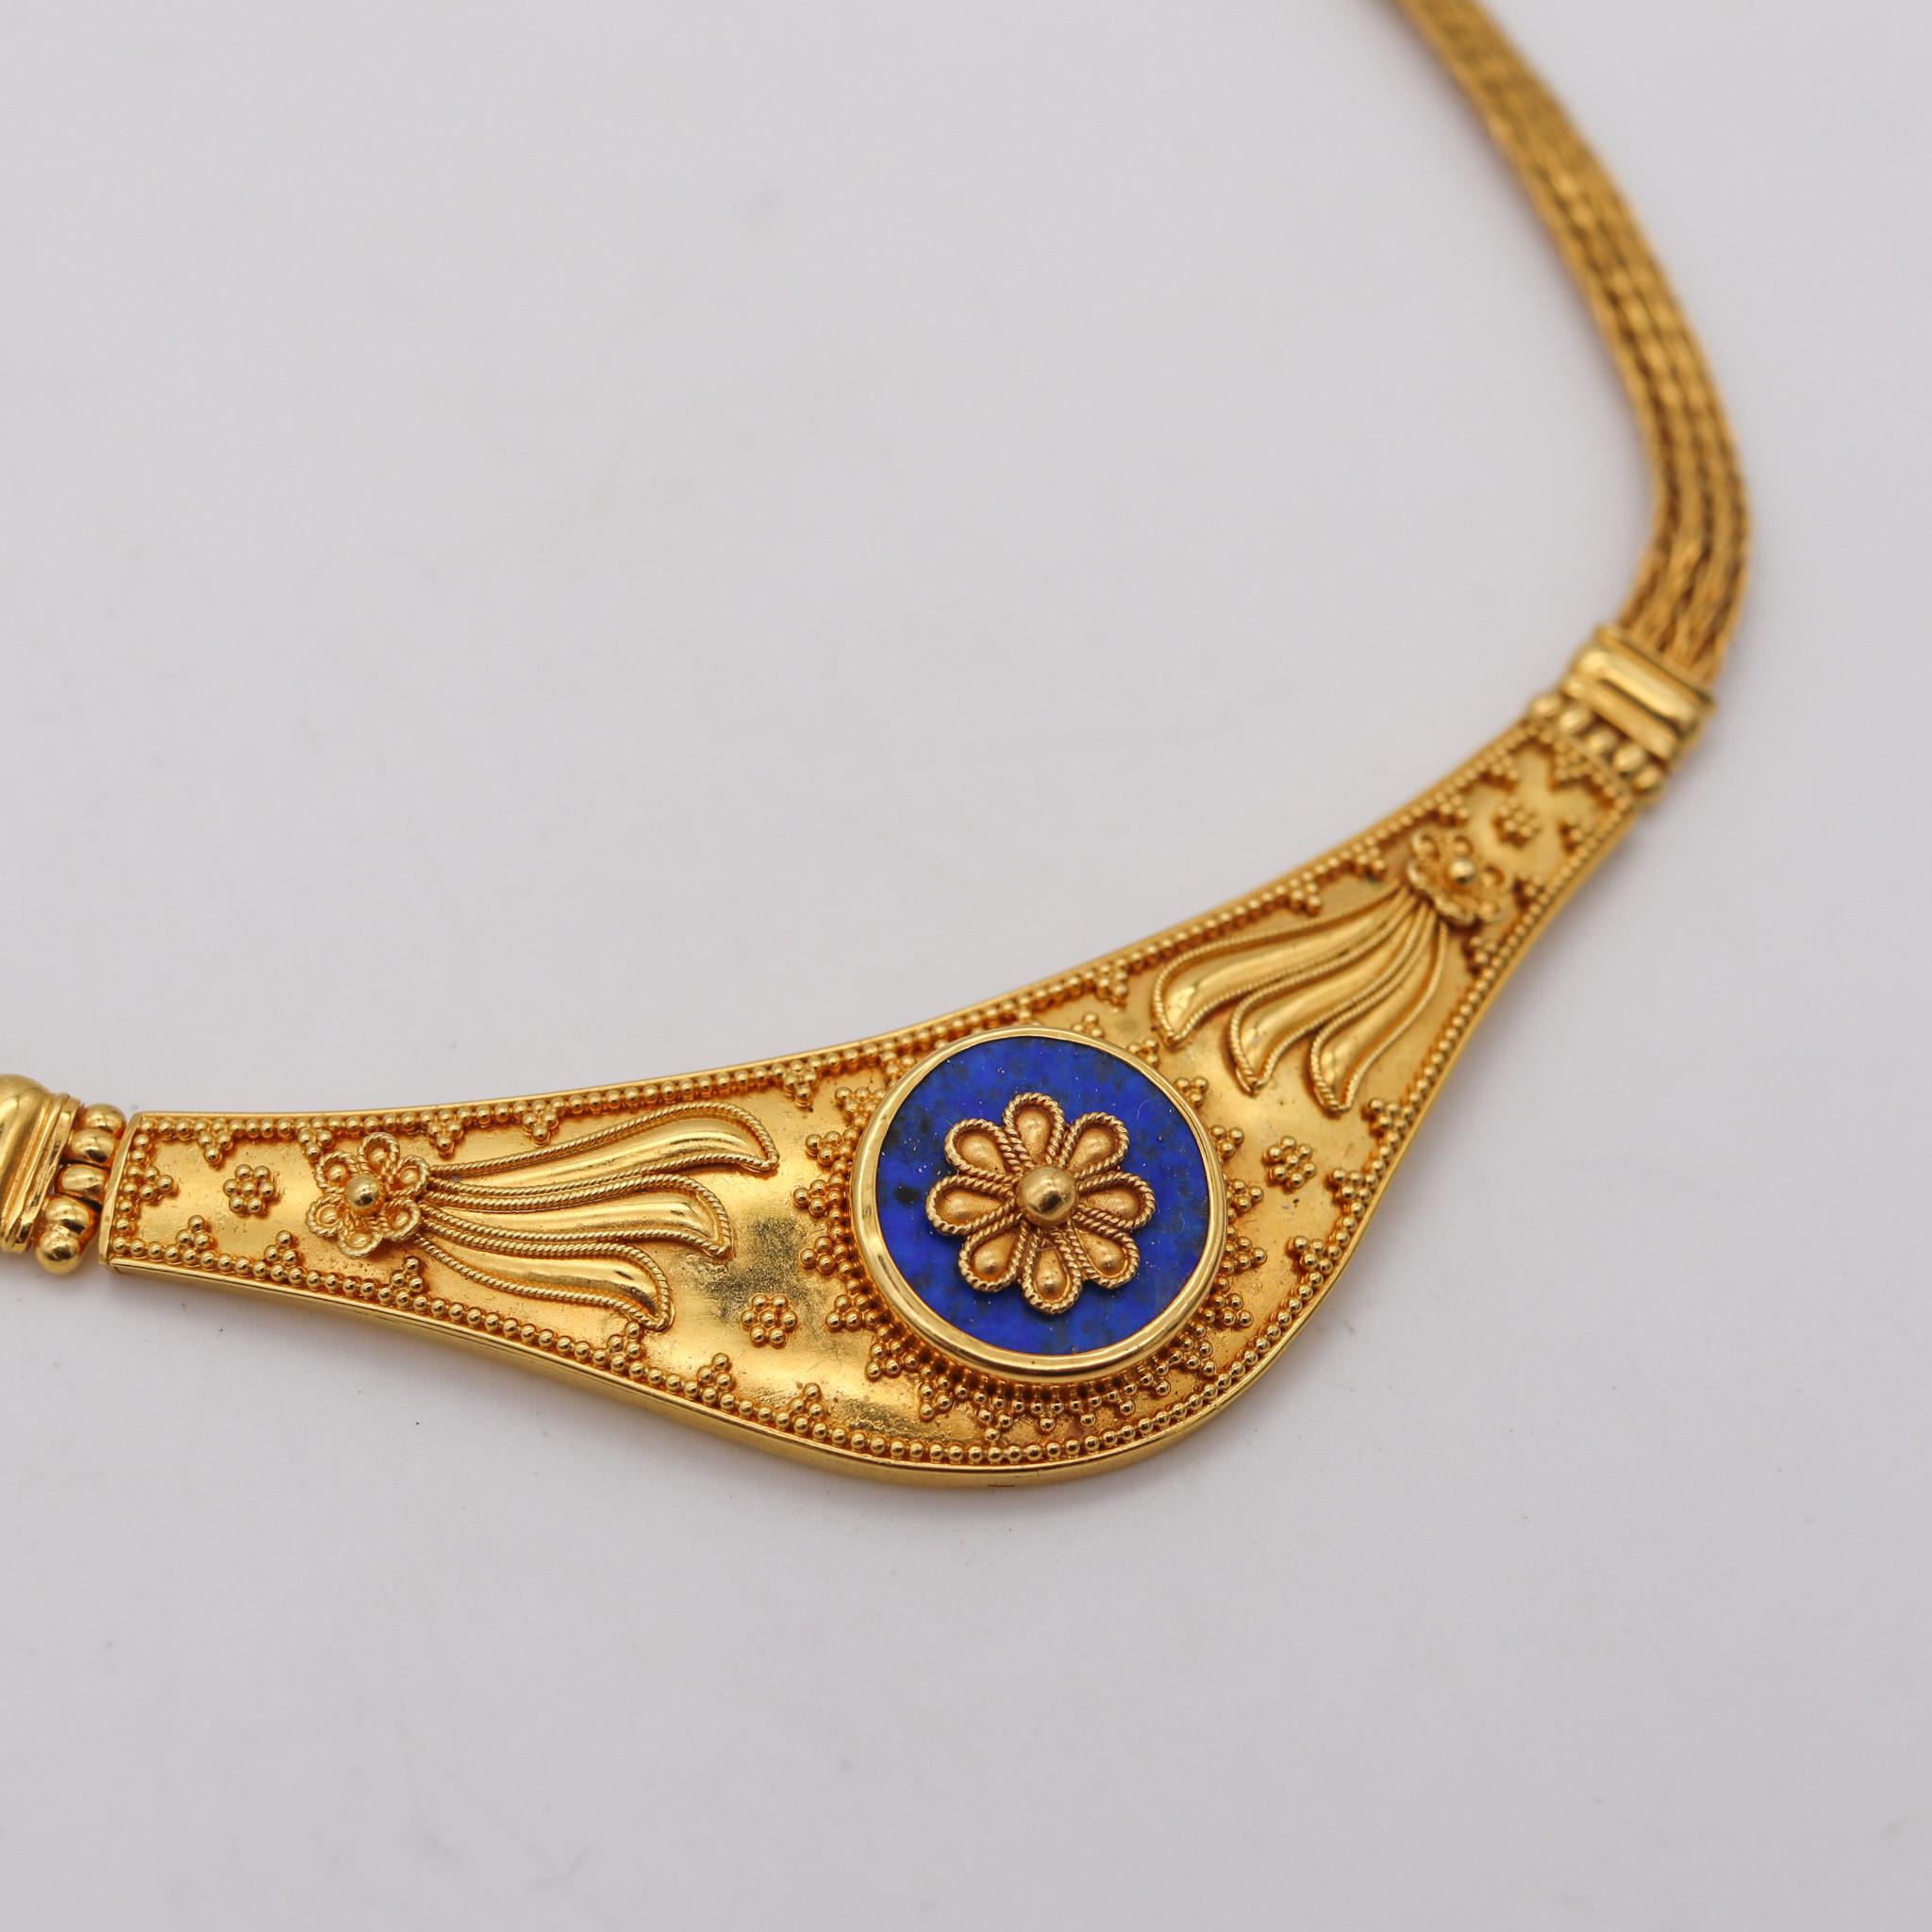 Greek revival necklace with lapis lazuli.

Beautiful, Hellenistic necklace, made in Greece in the style of the ancient Greeks with floreated designs. This unusual necklace has been crafted in solid yellow gold of 22 karats with highly textured